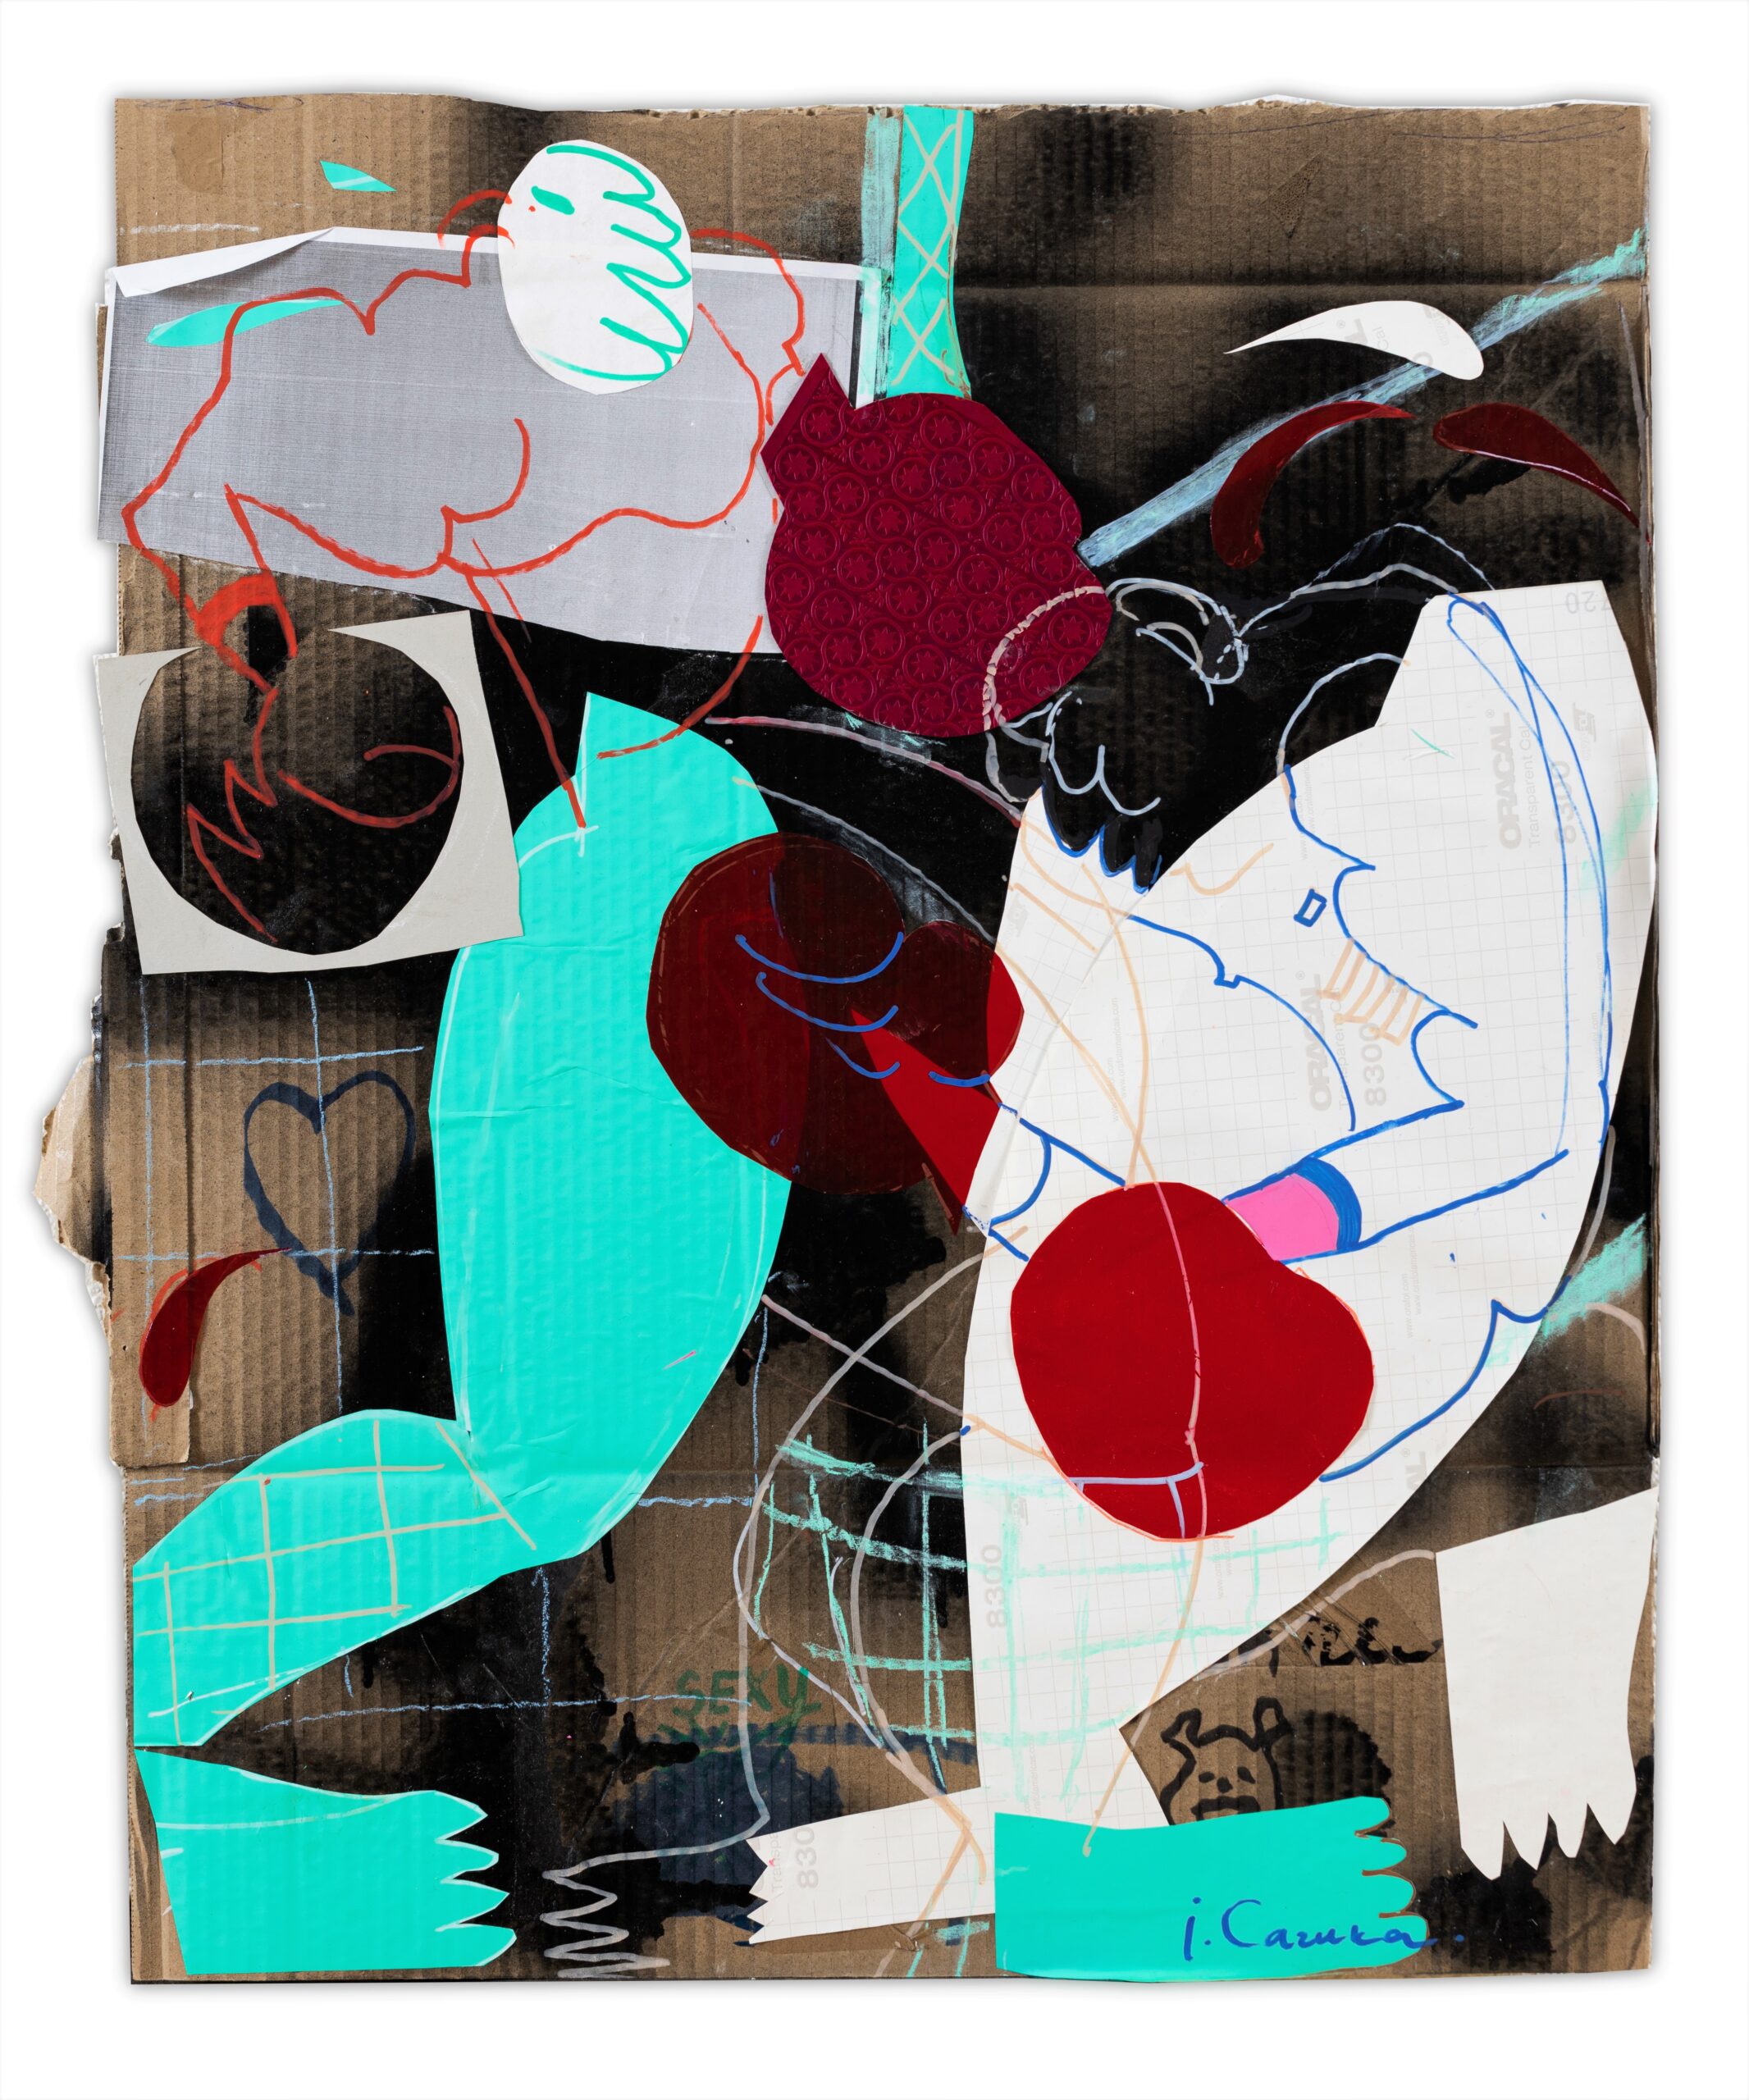 Wins and losses 2. Collage, plastic adhesive films, acrylic markers, spray paint, cardboard. 62x75cm 2023.